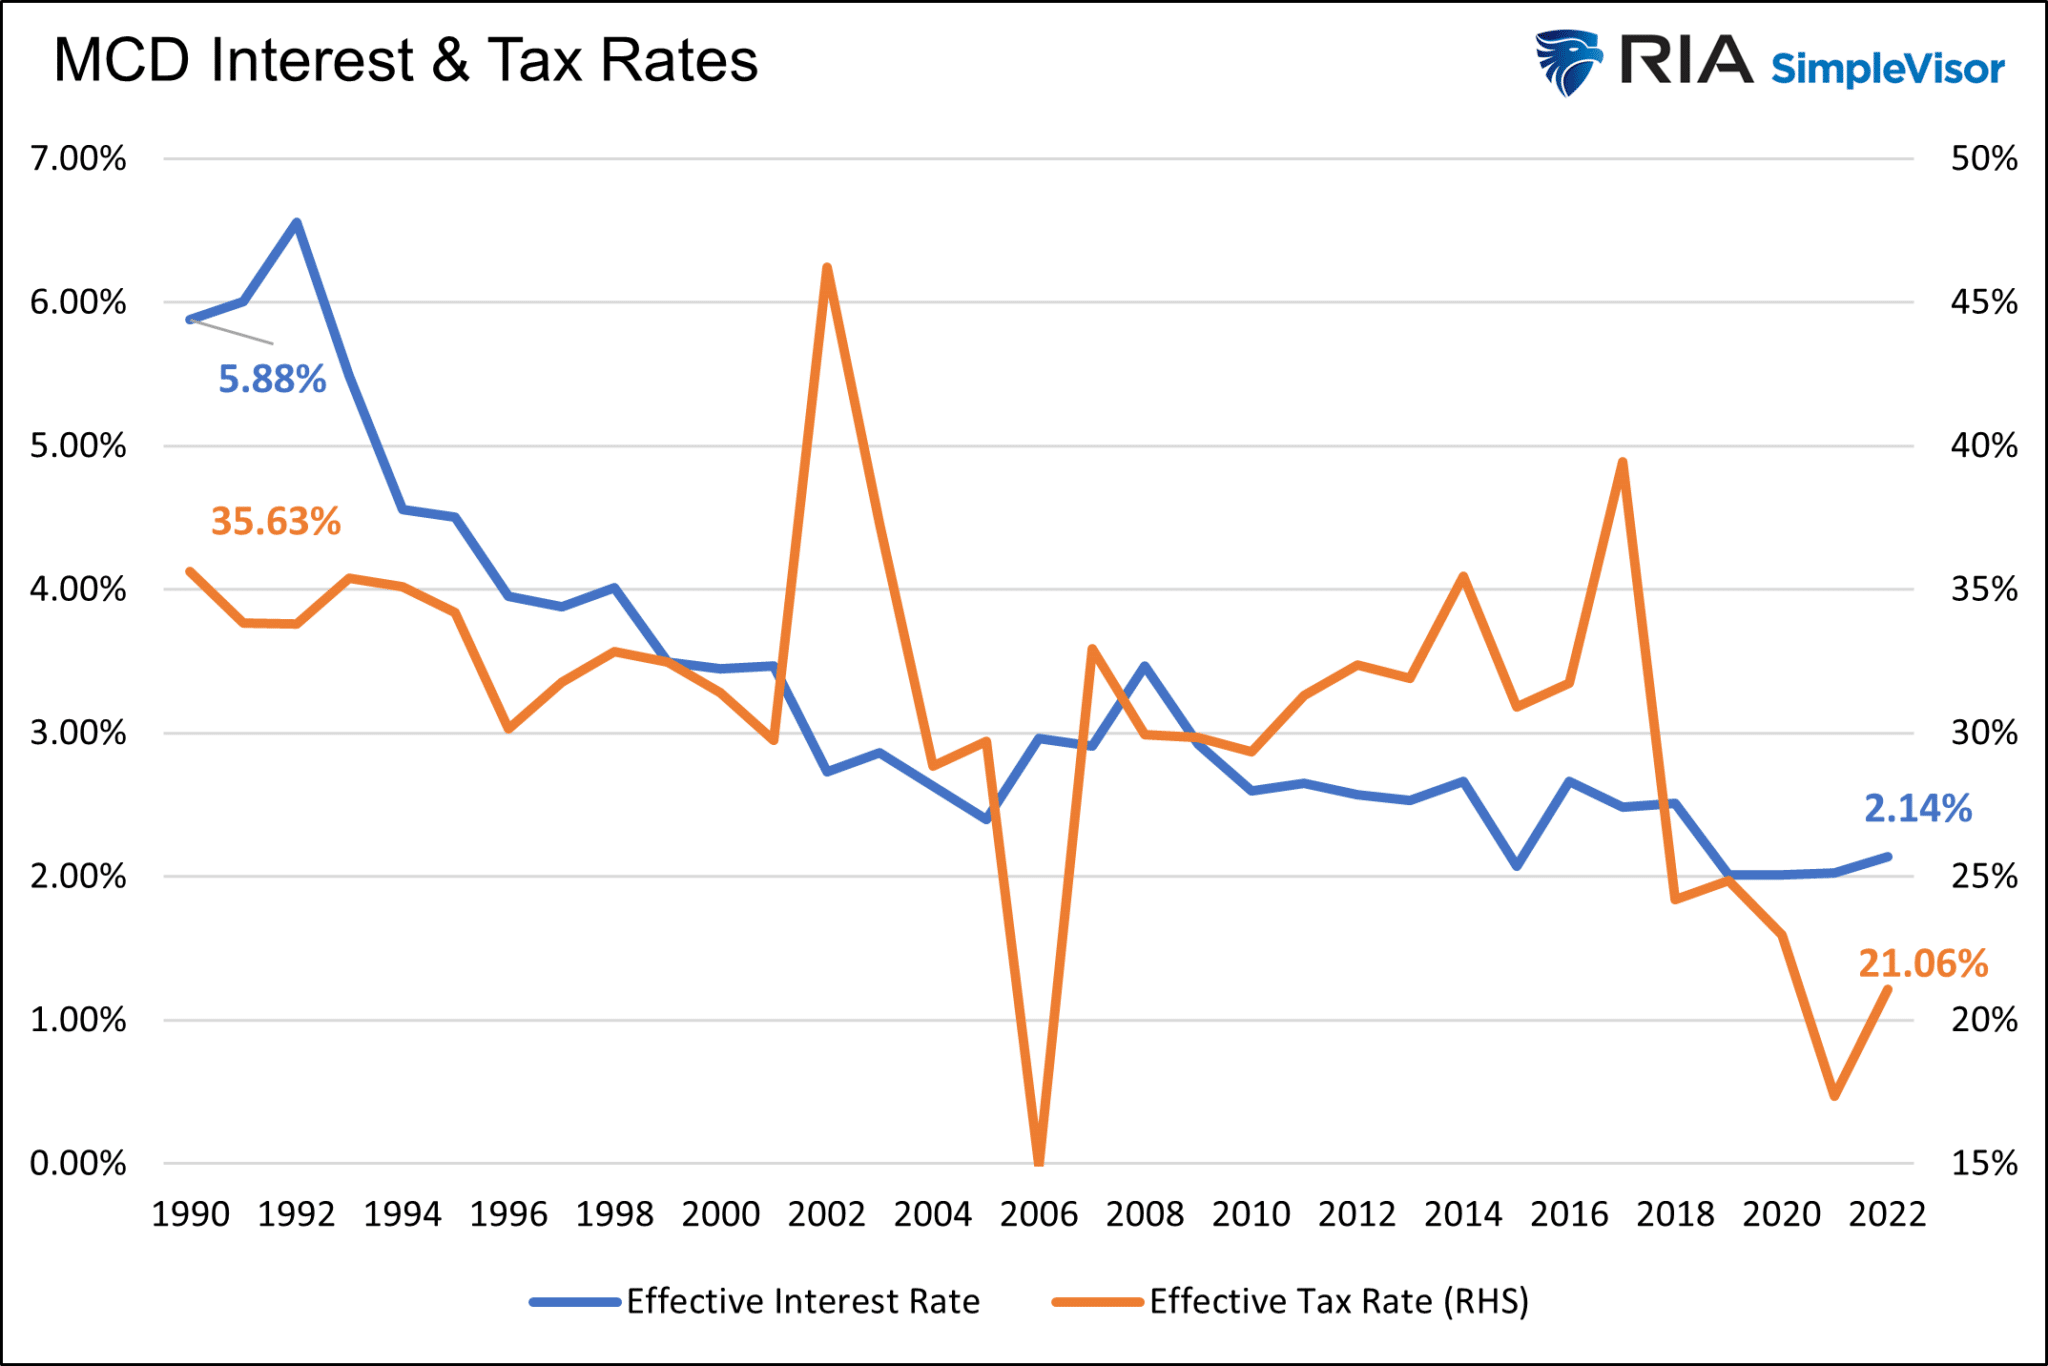 MCD Interest Rate And Tax